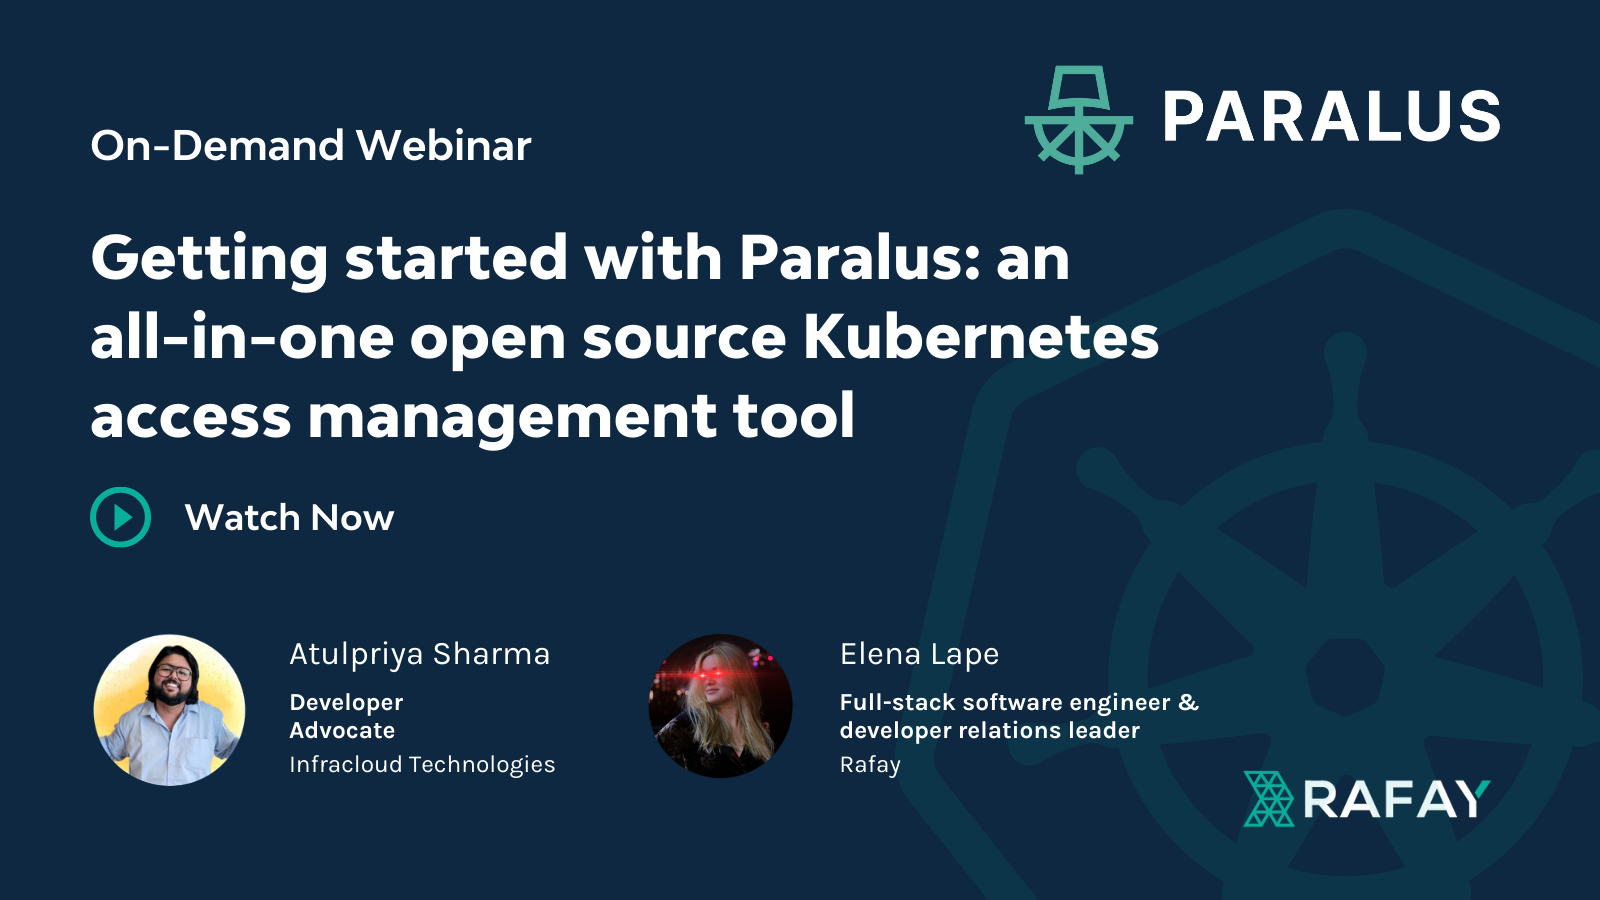 image for Getting started with Paralus: an all-in-one open source Kubernetes access management tool